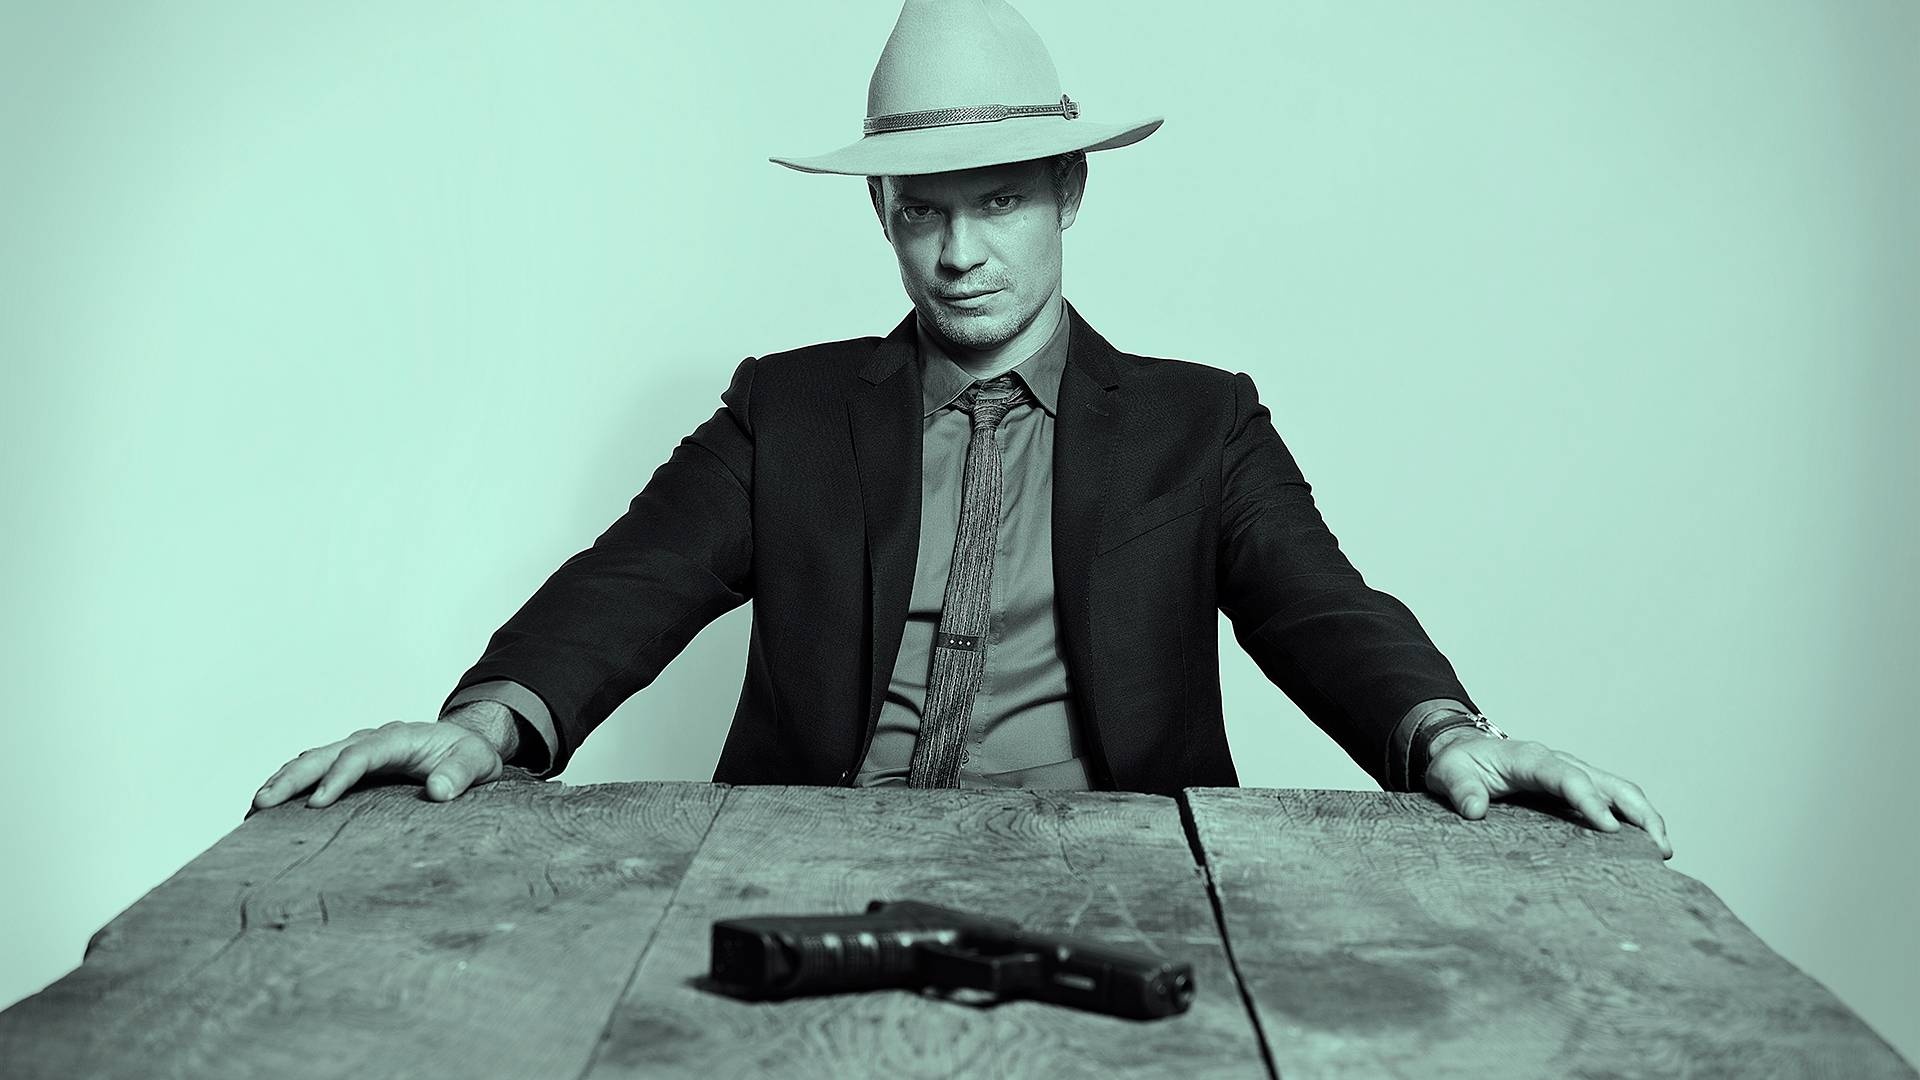 Justified TV Series, Season 6 highlights, Exciting conclusion, Raylan Givens, 1920x1080 Full HD Desktop